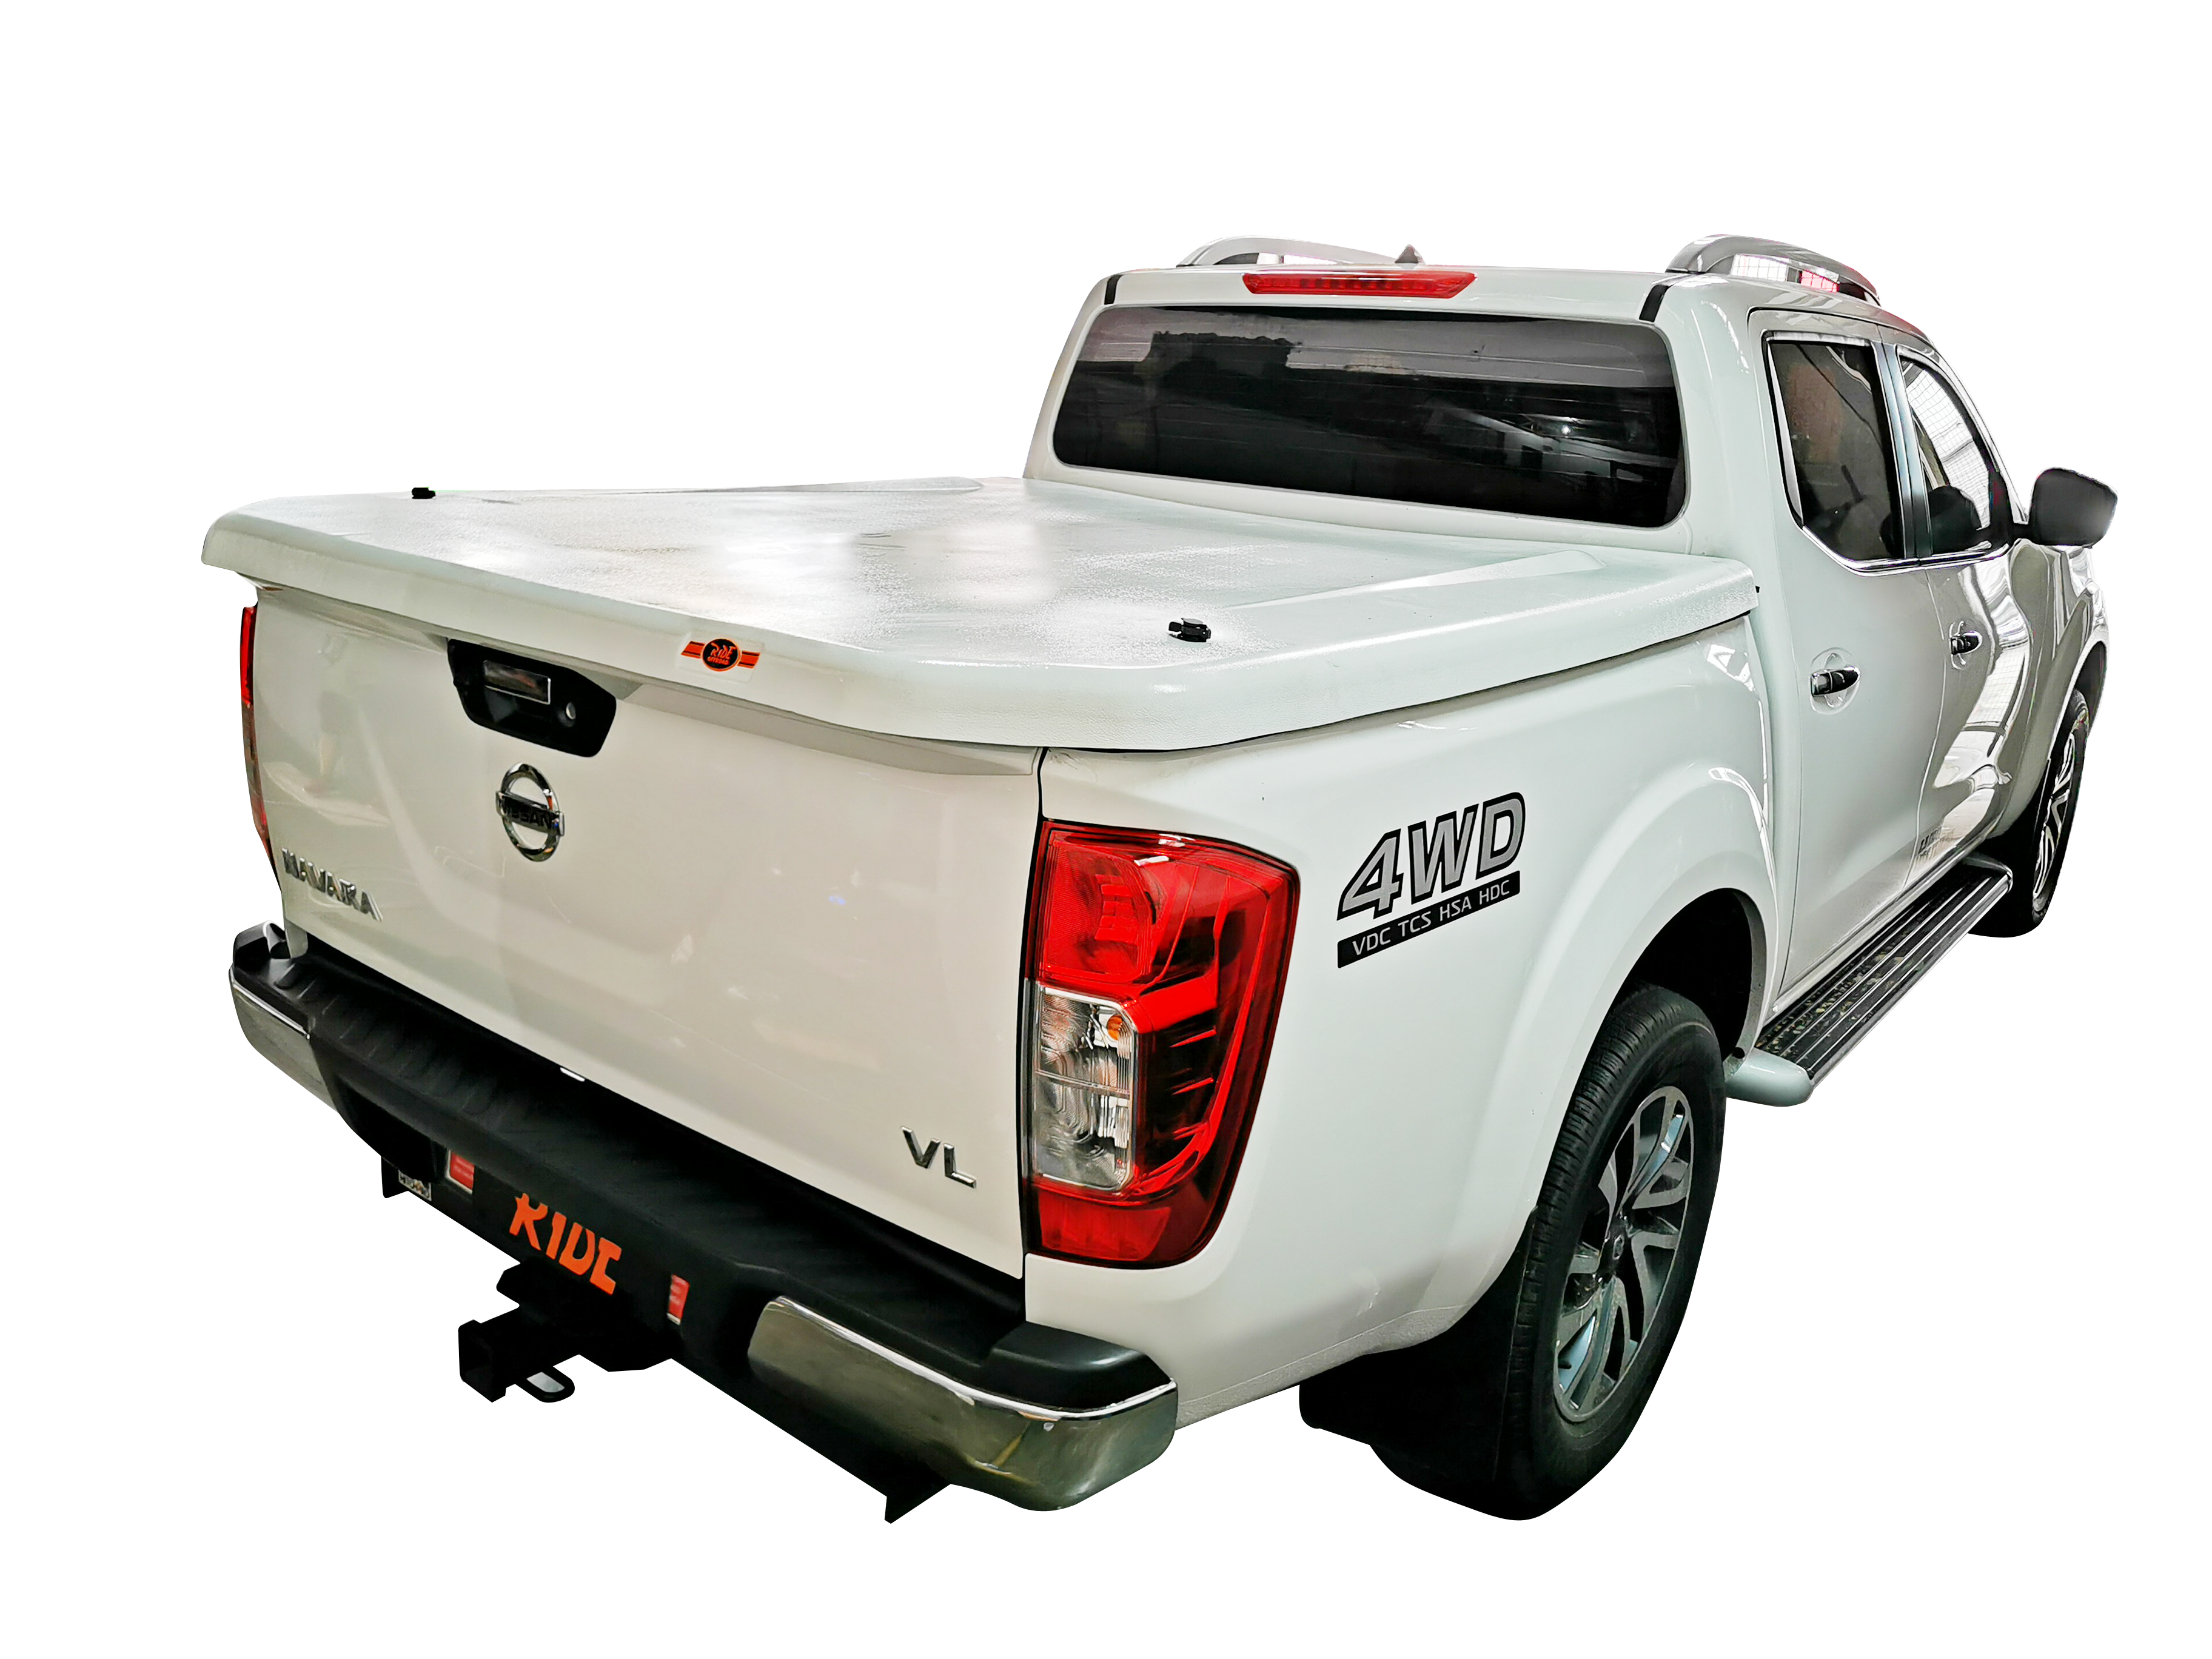 Pickup Truck Bed Covers 101: Choosing The Right Cover For Your Truck -  Philippines